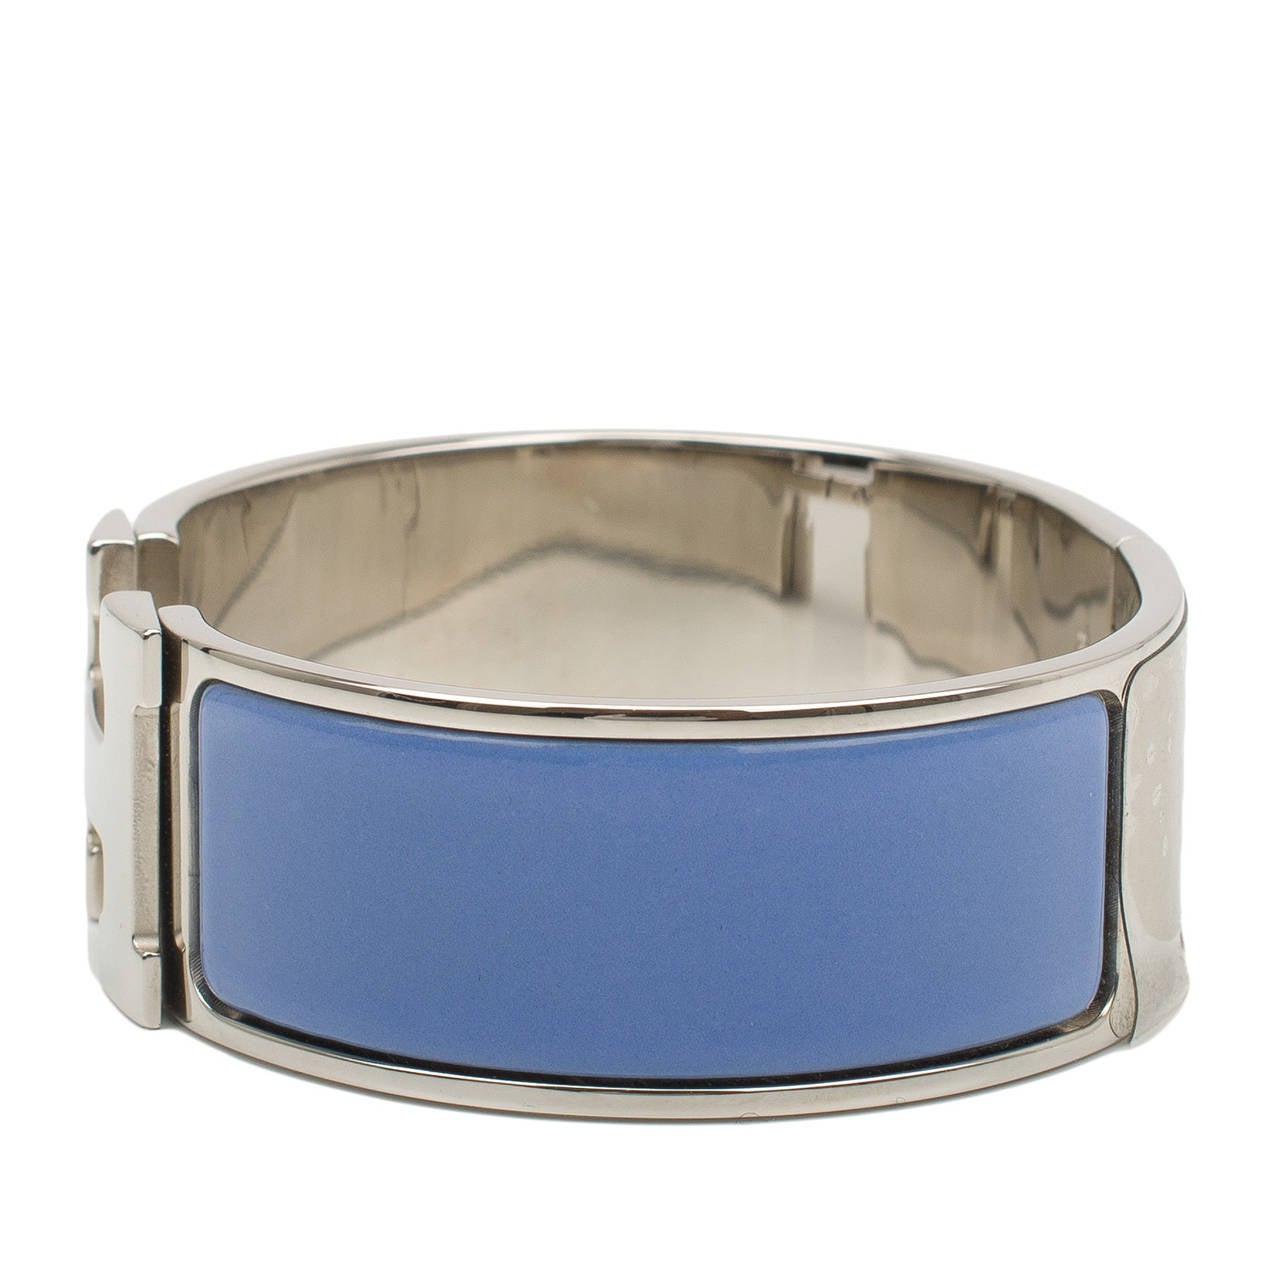 Hermes wide Clic Clac H bracelet in Petrole Blue enamel with palladium and silver plated hardware in size PM.

Condition: Pristine; store fresh condition

Accompanied by: Hermes box, dustbag

Measurements: Diameter: 2.25"; Circumference: